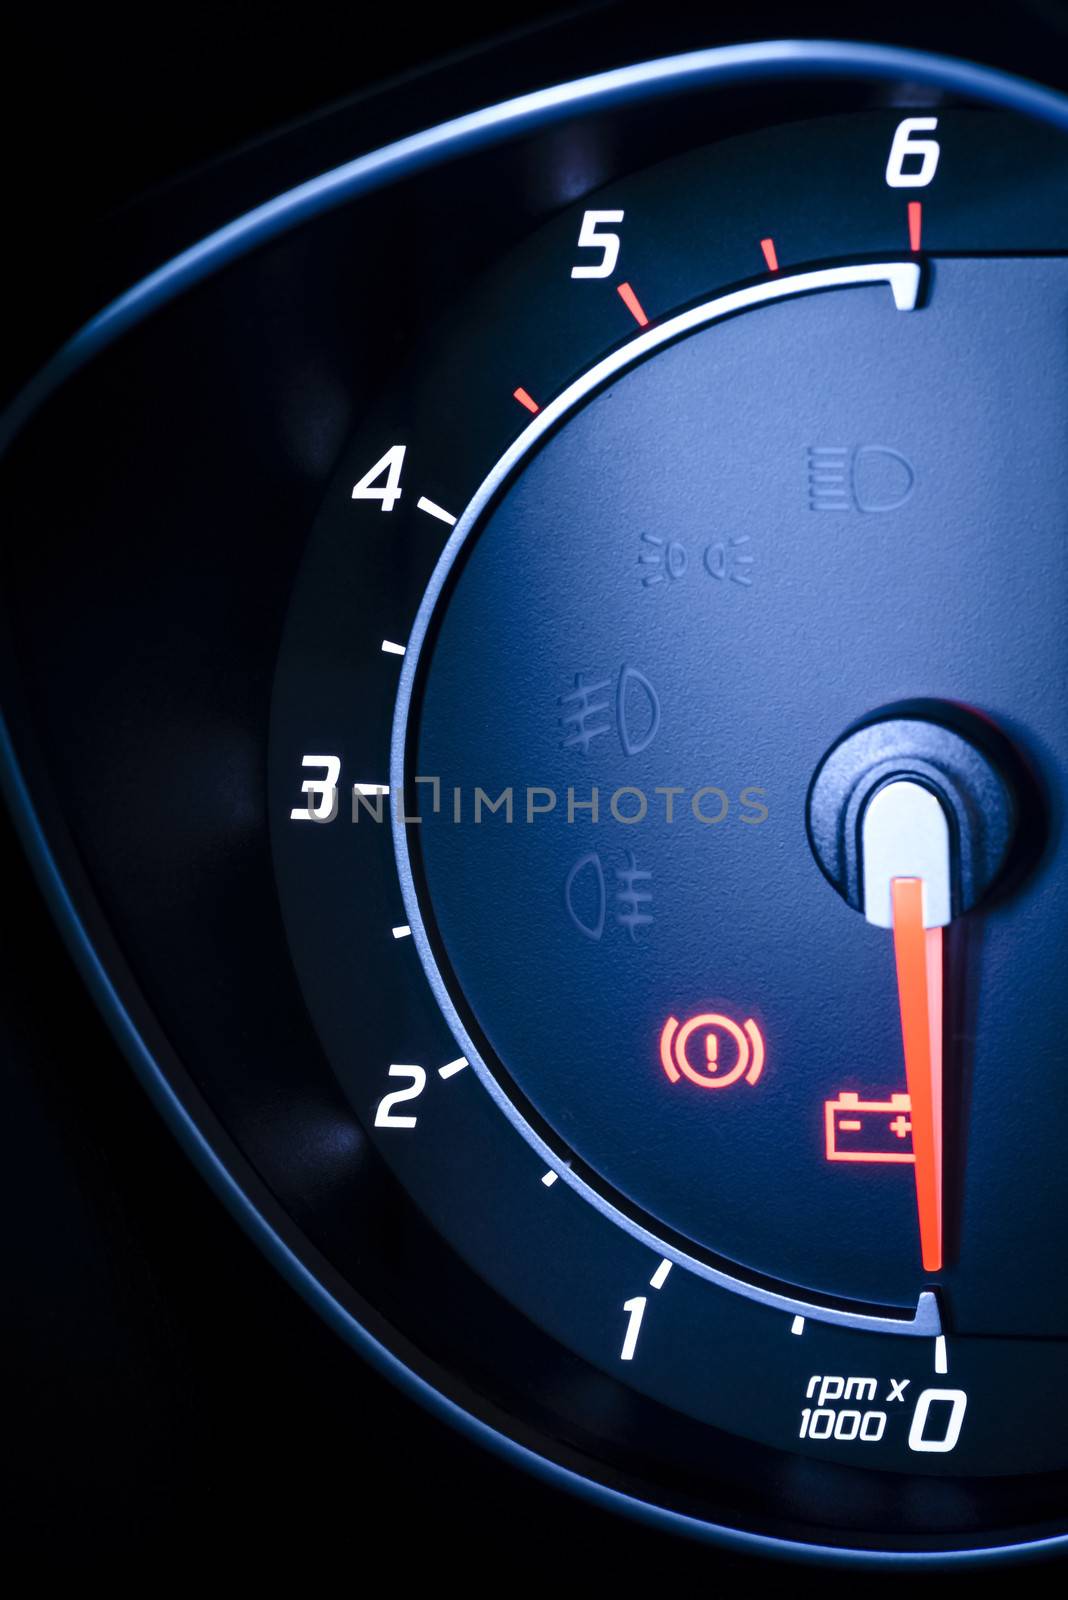 Fragment of instrument panel of car speedometer, tachometer with visible symbols of instrument cluster, with warning lamps illuminated. by westernstudio